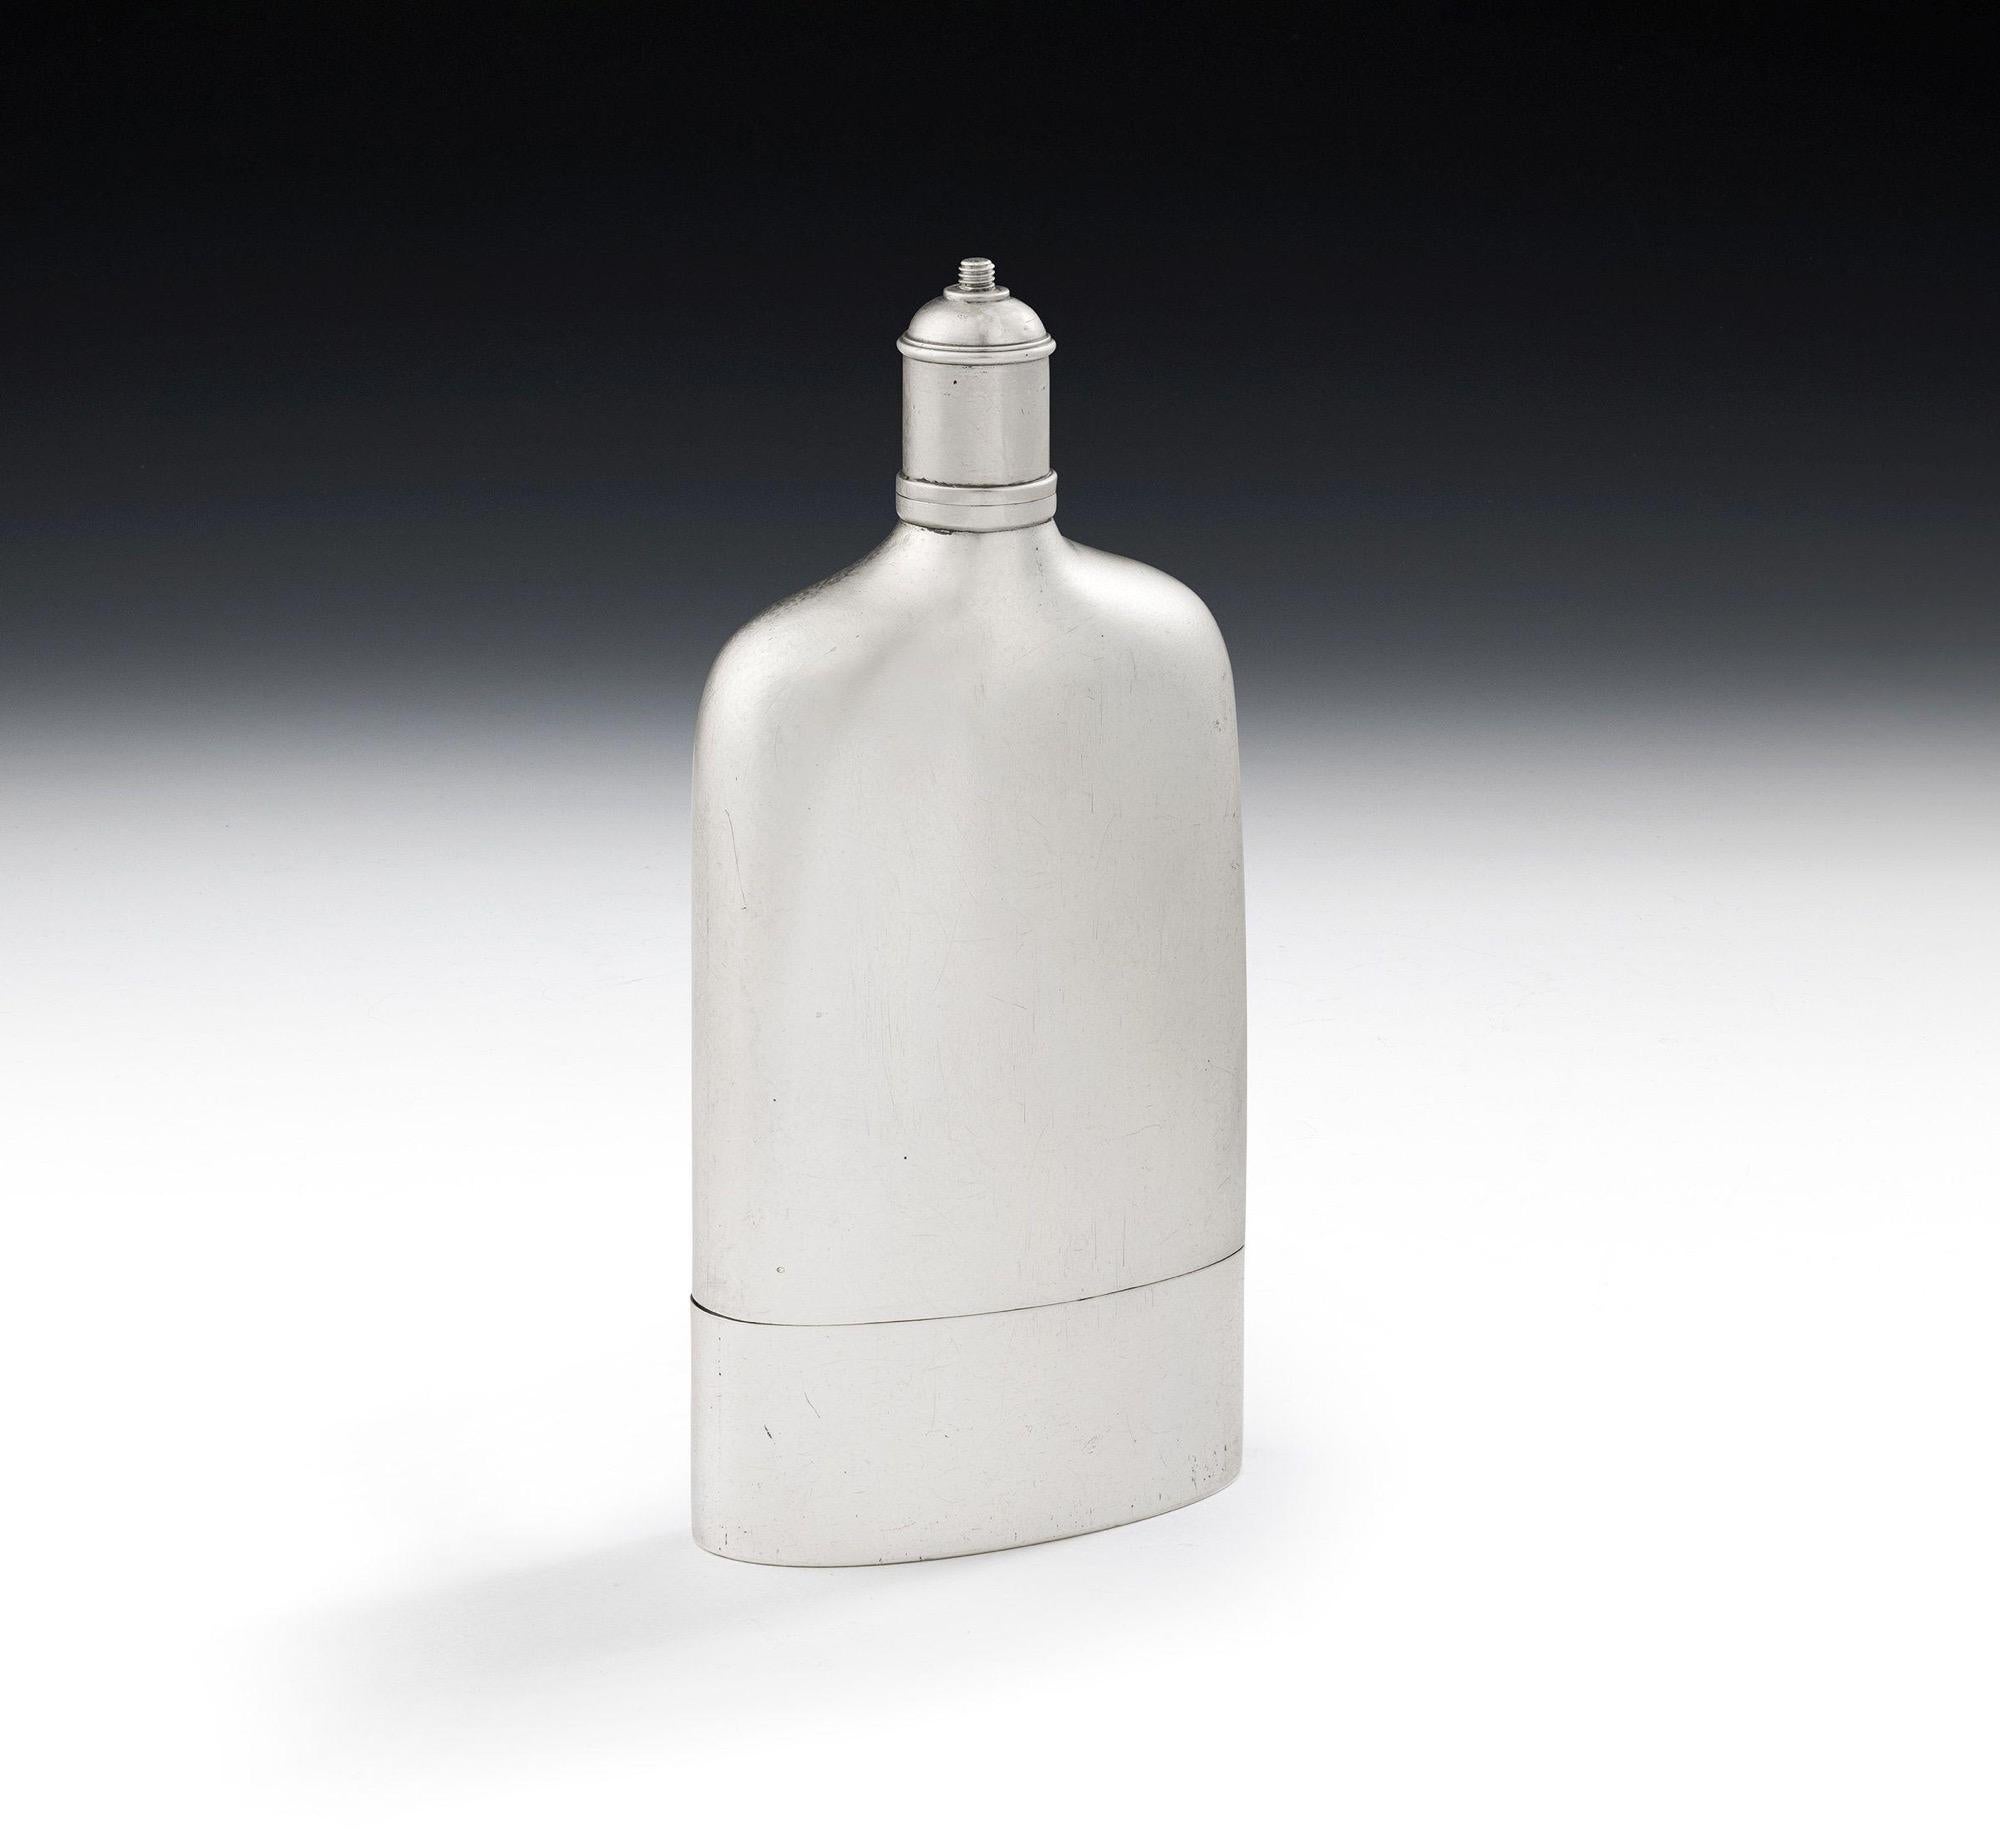 A Very Rare Gorge III Hip Flask Made in London in 1802 by Peter, Ann & William Bateman.

Hip Flasks are extremely rare from this early date, as they gain popularity during the Victorian period. This example is plain in design with a kidney shaped